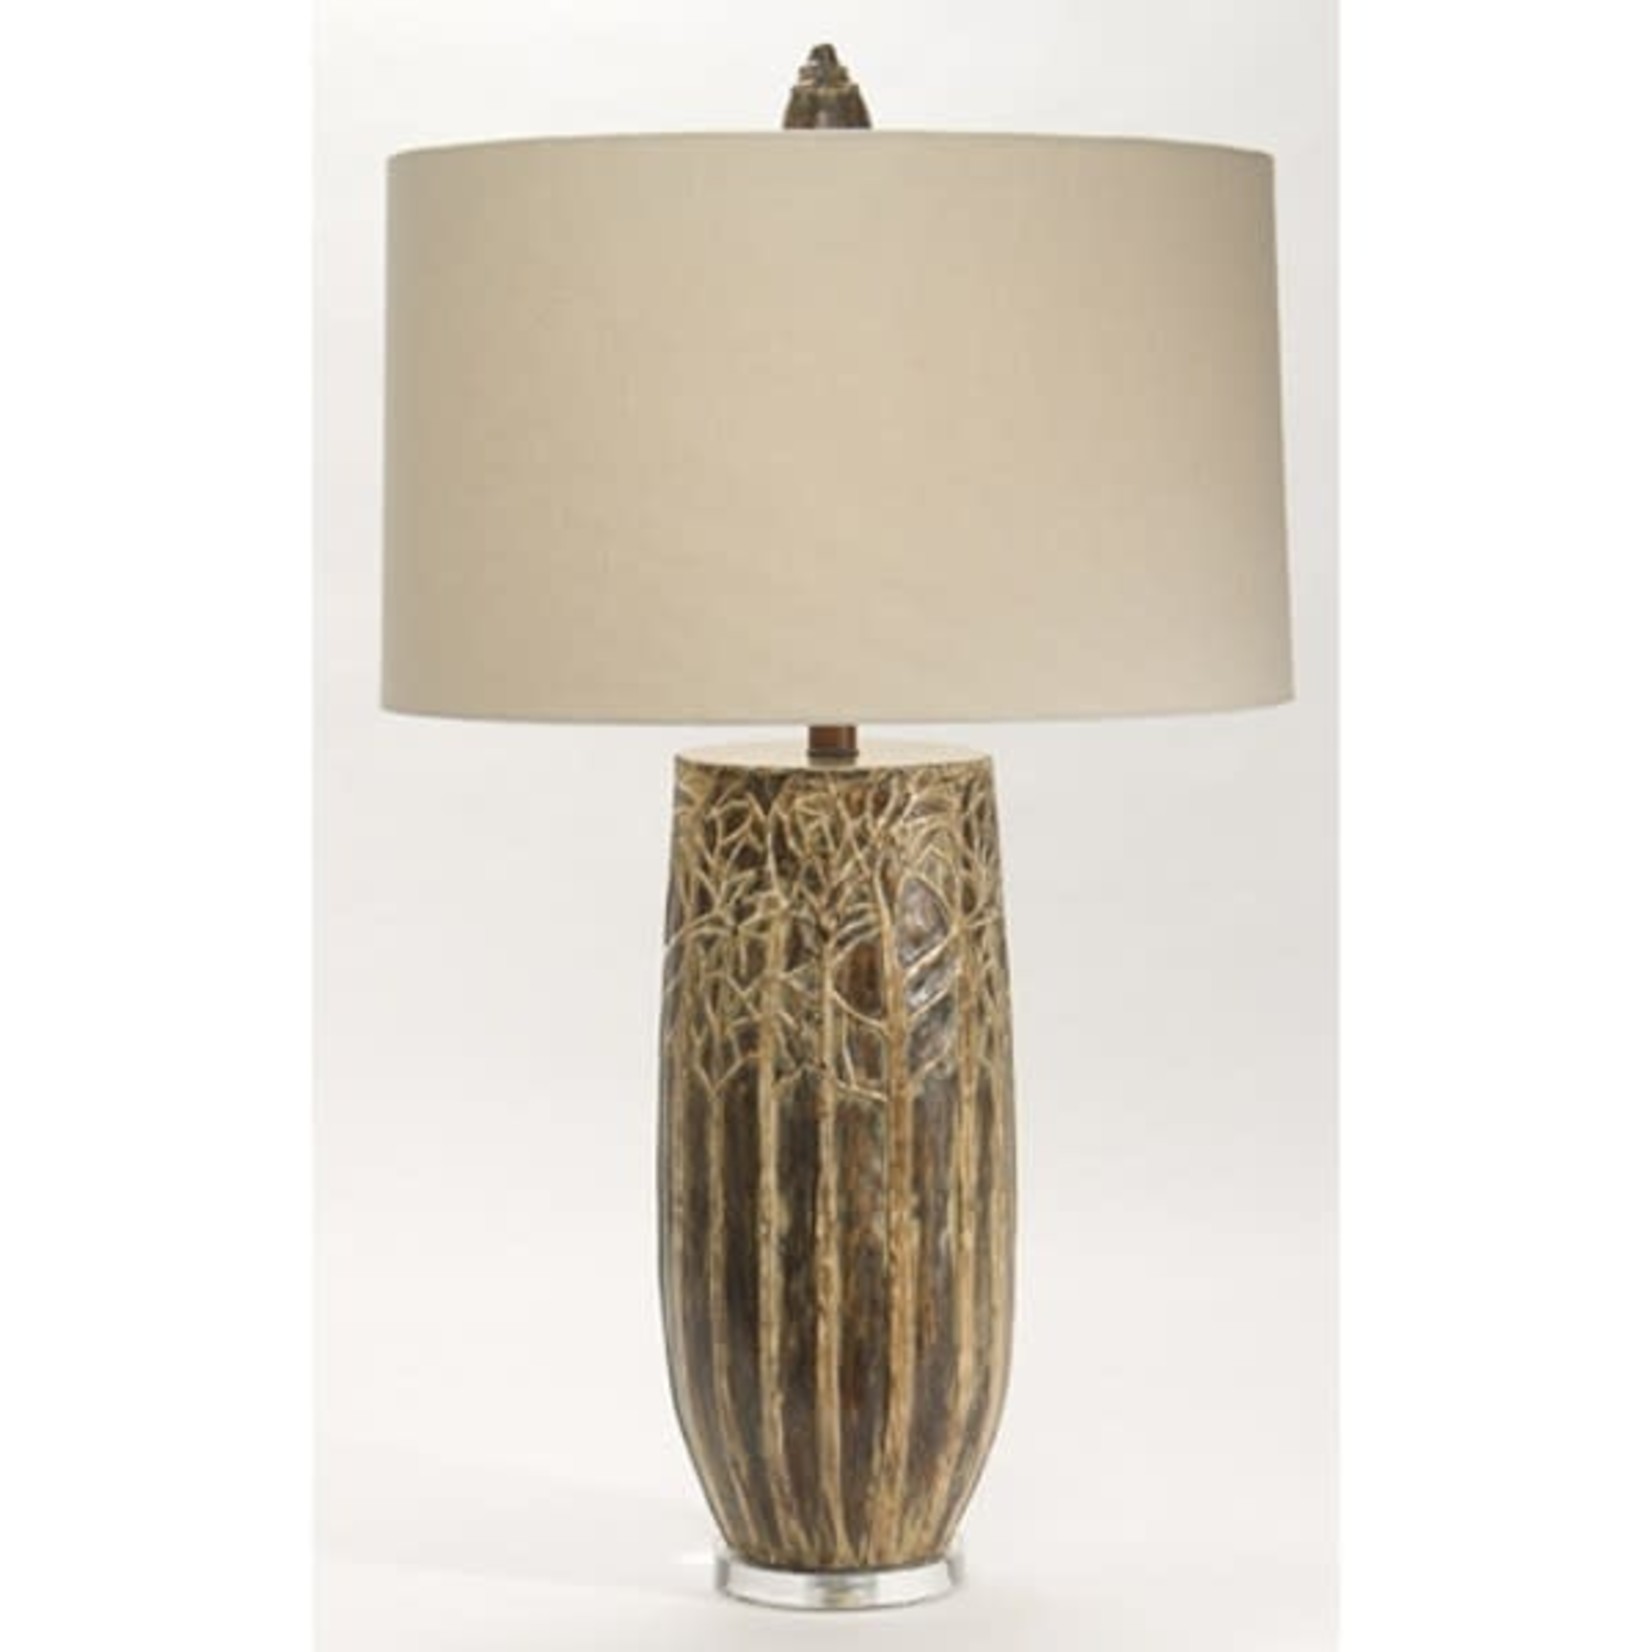 Brown Forest Table Lamp-NL